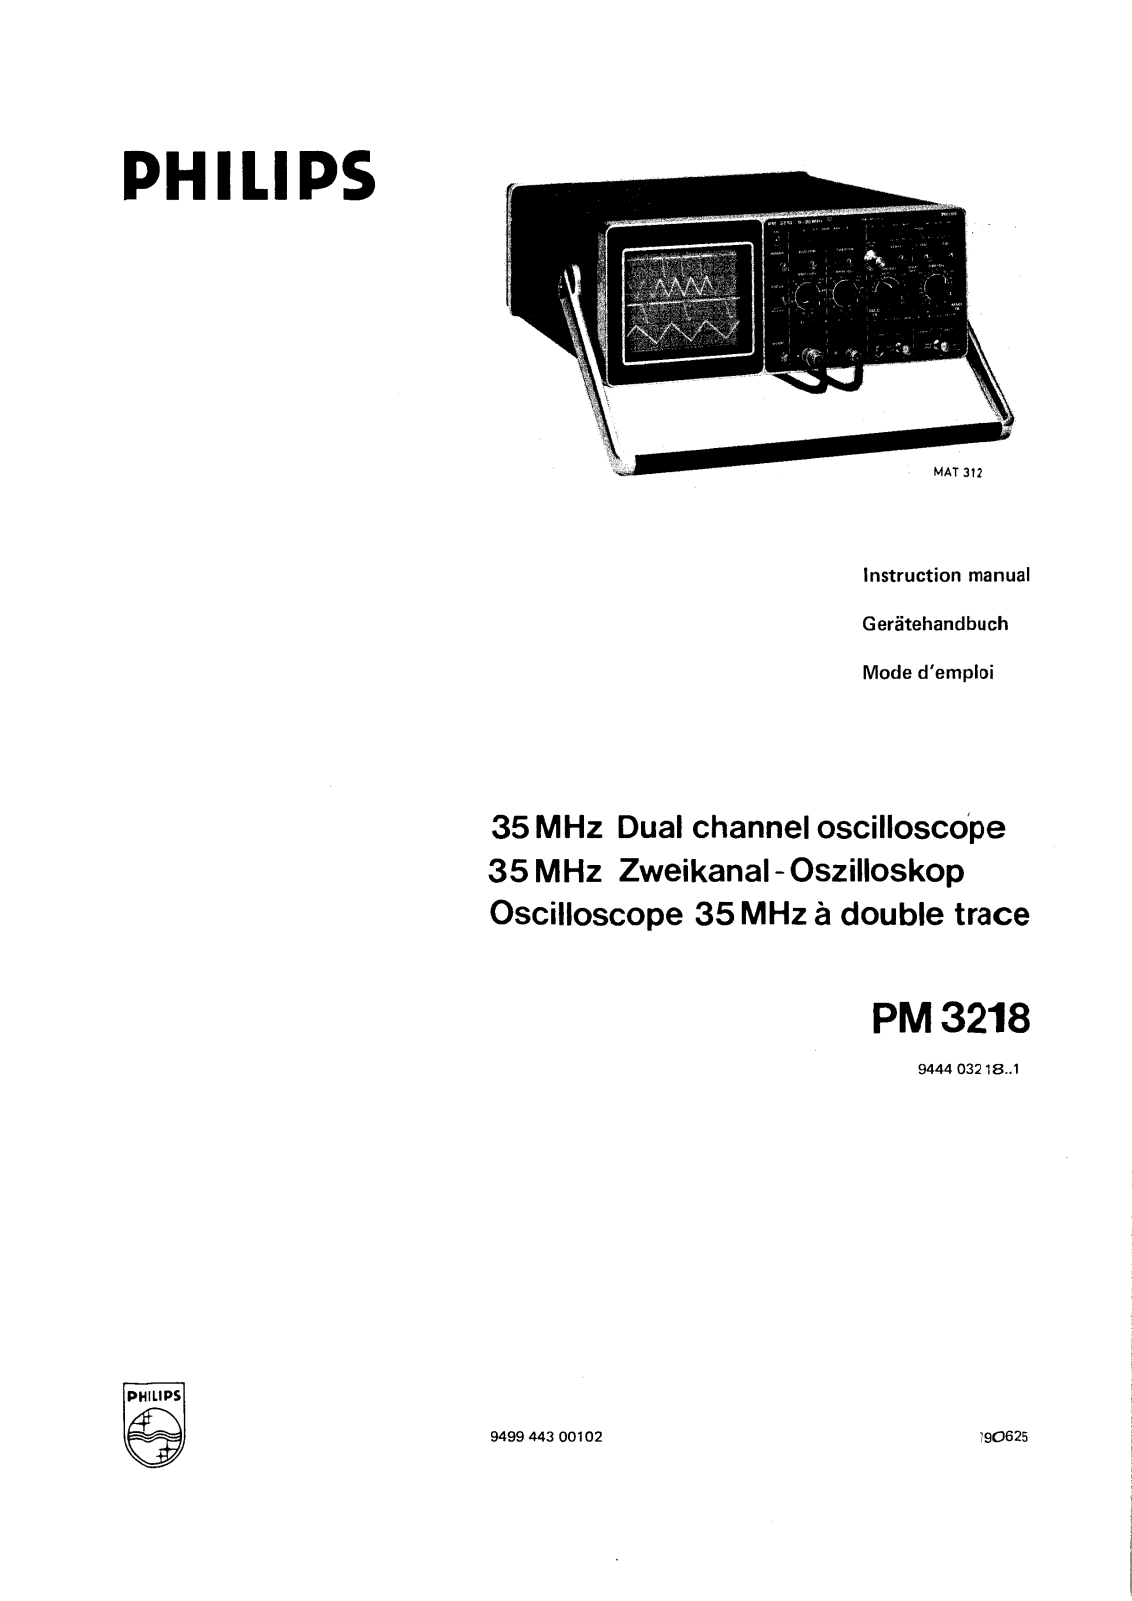 Philips PM-3218 Service Manual